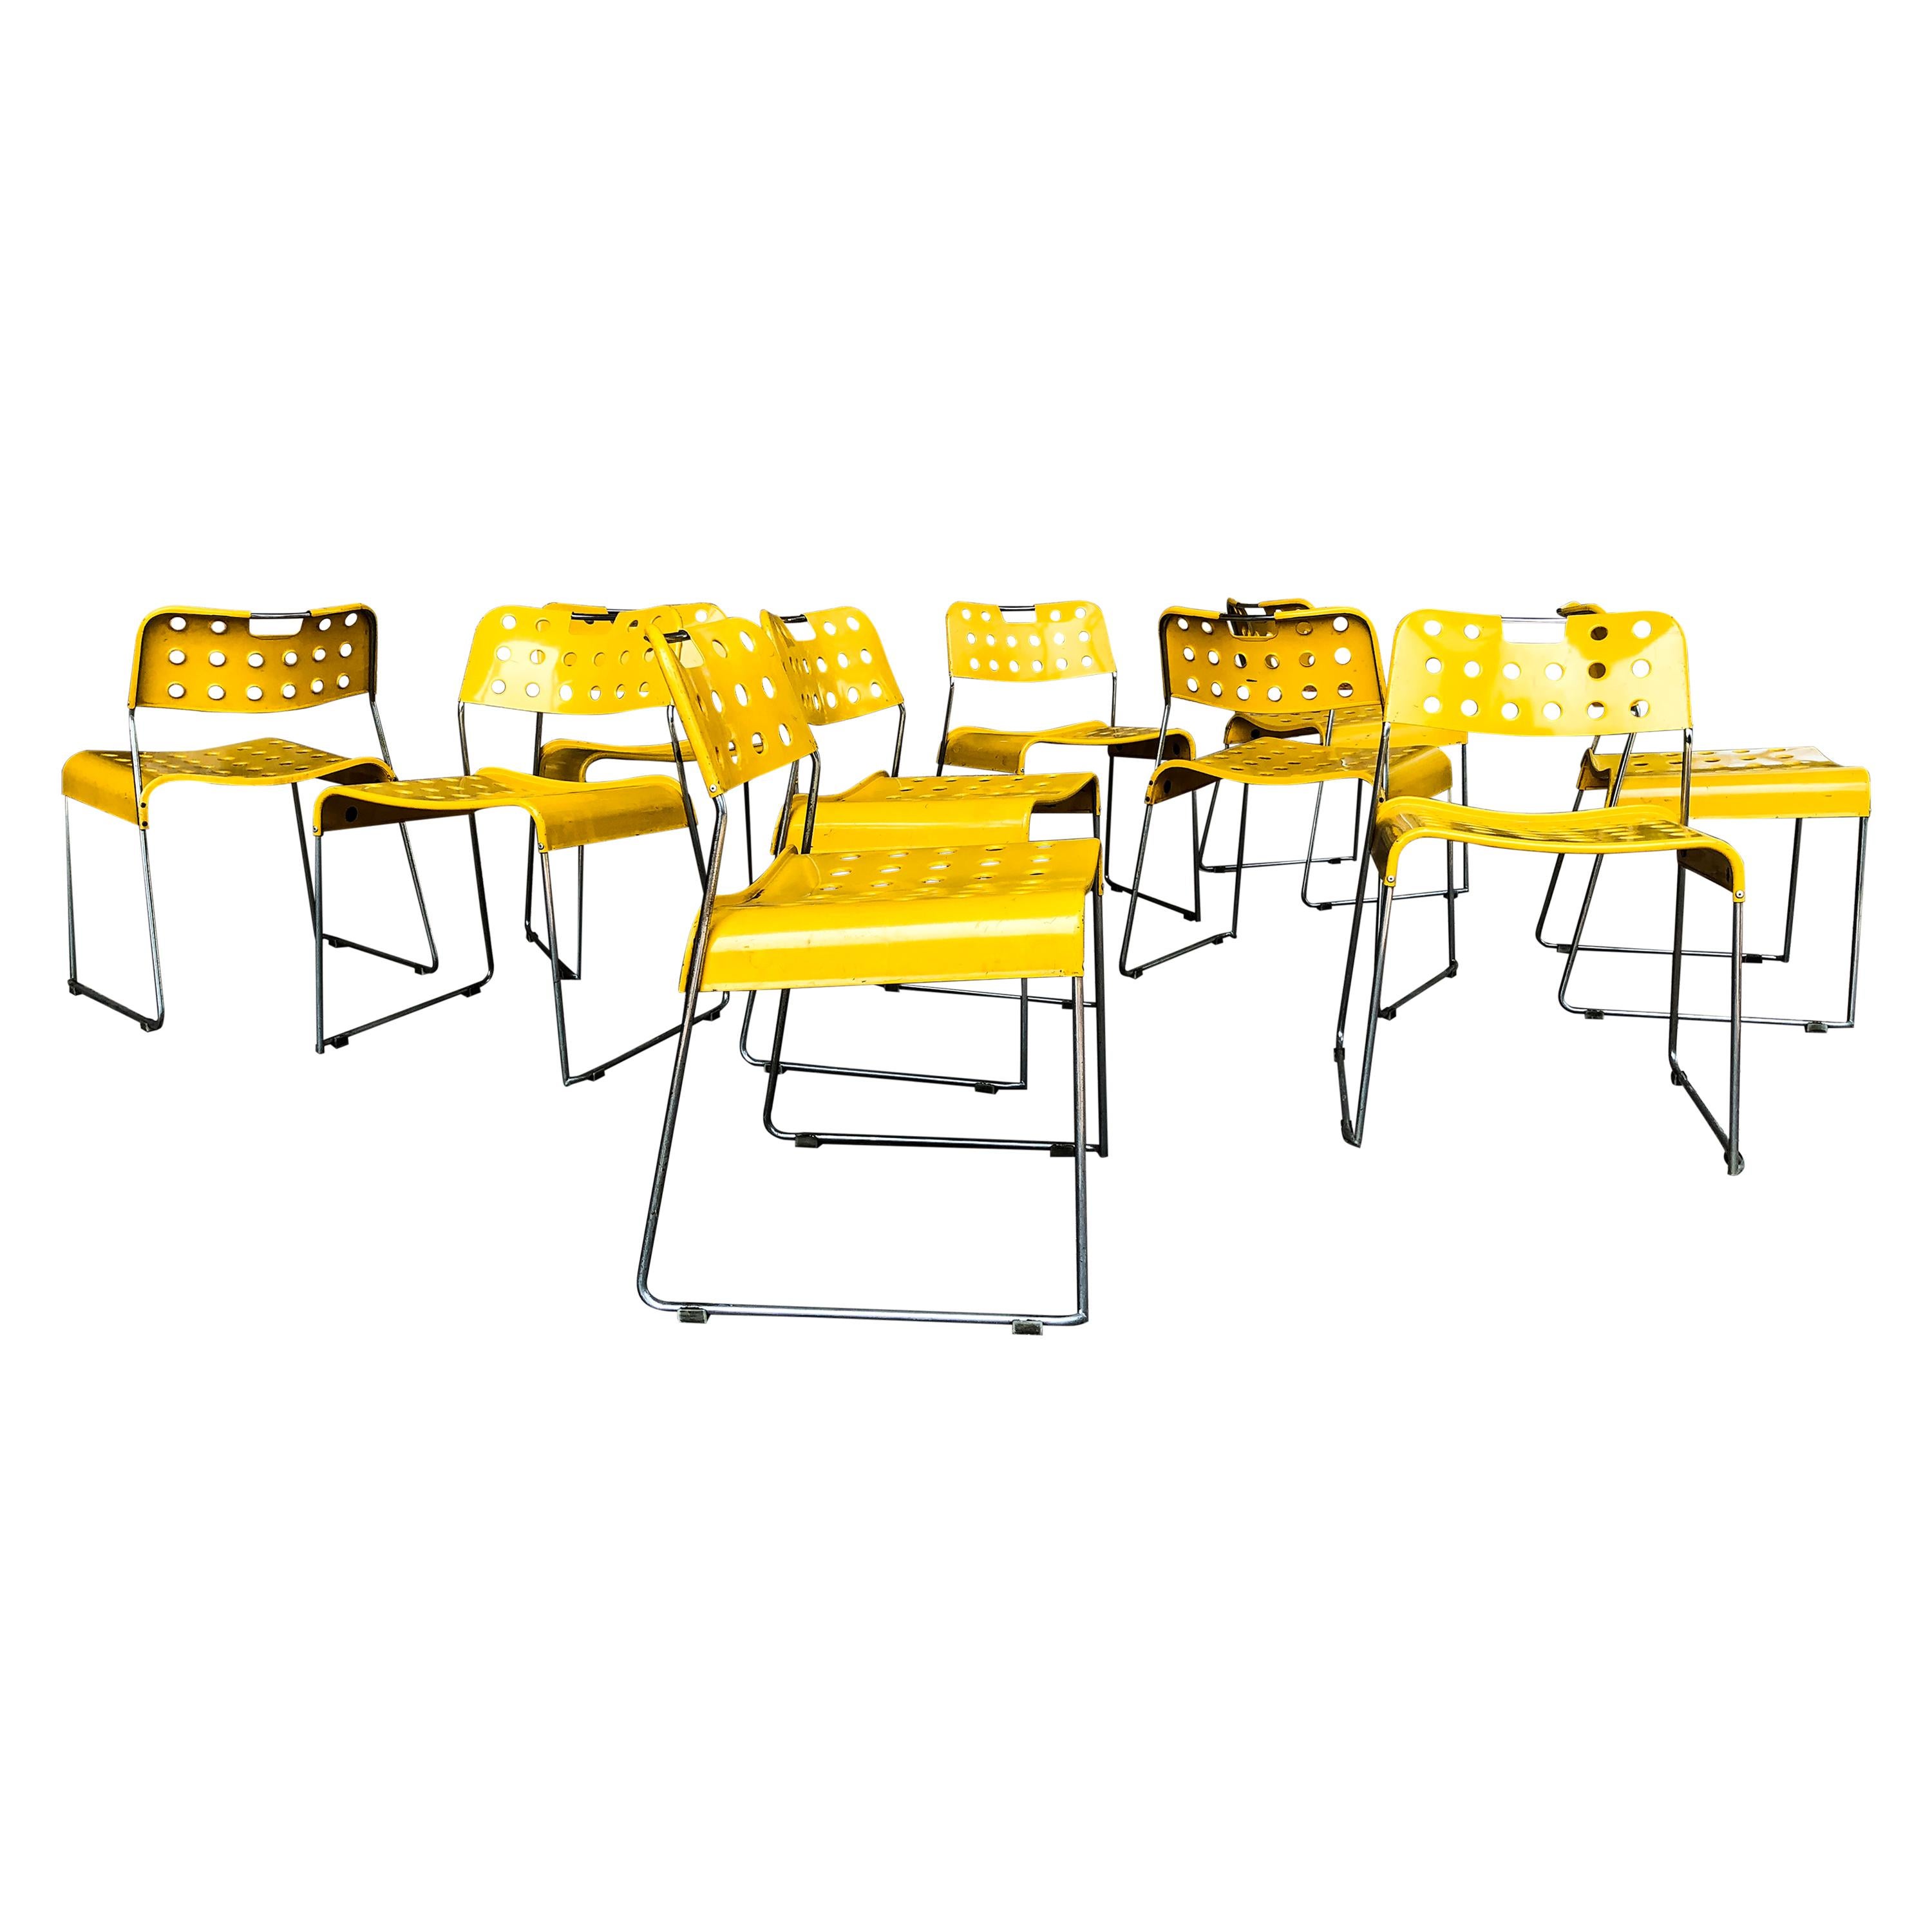 Steel Rodney Kinsman Space Age Yellow Omstak Chair for Bieffeplast, 1971, Set of 8 For Sale